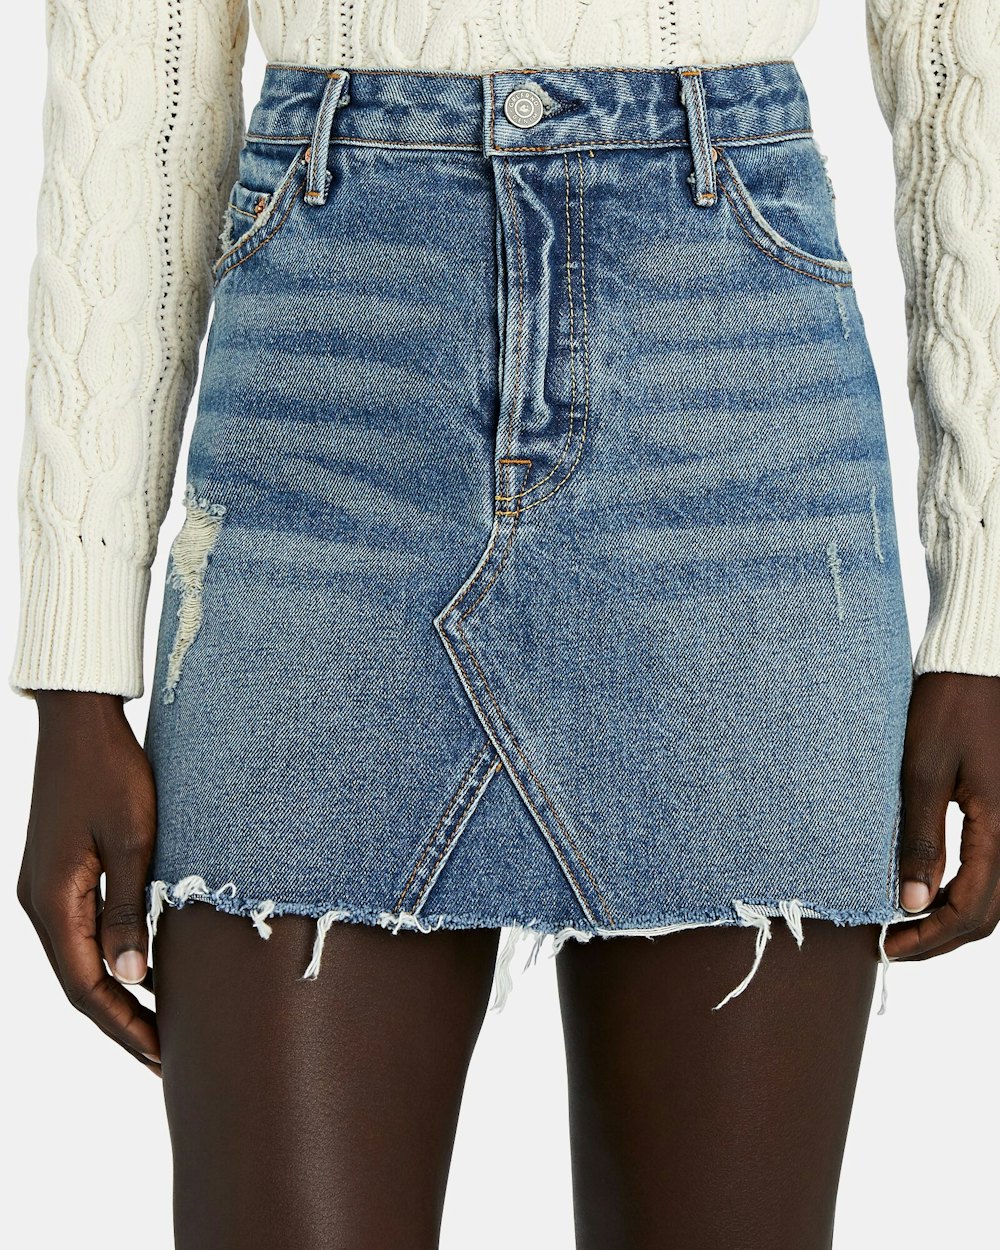 The Mini Skirt Trends You'll Want To Wear All Summer